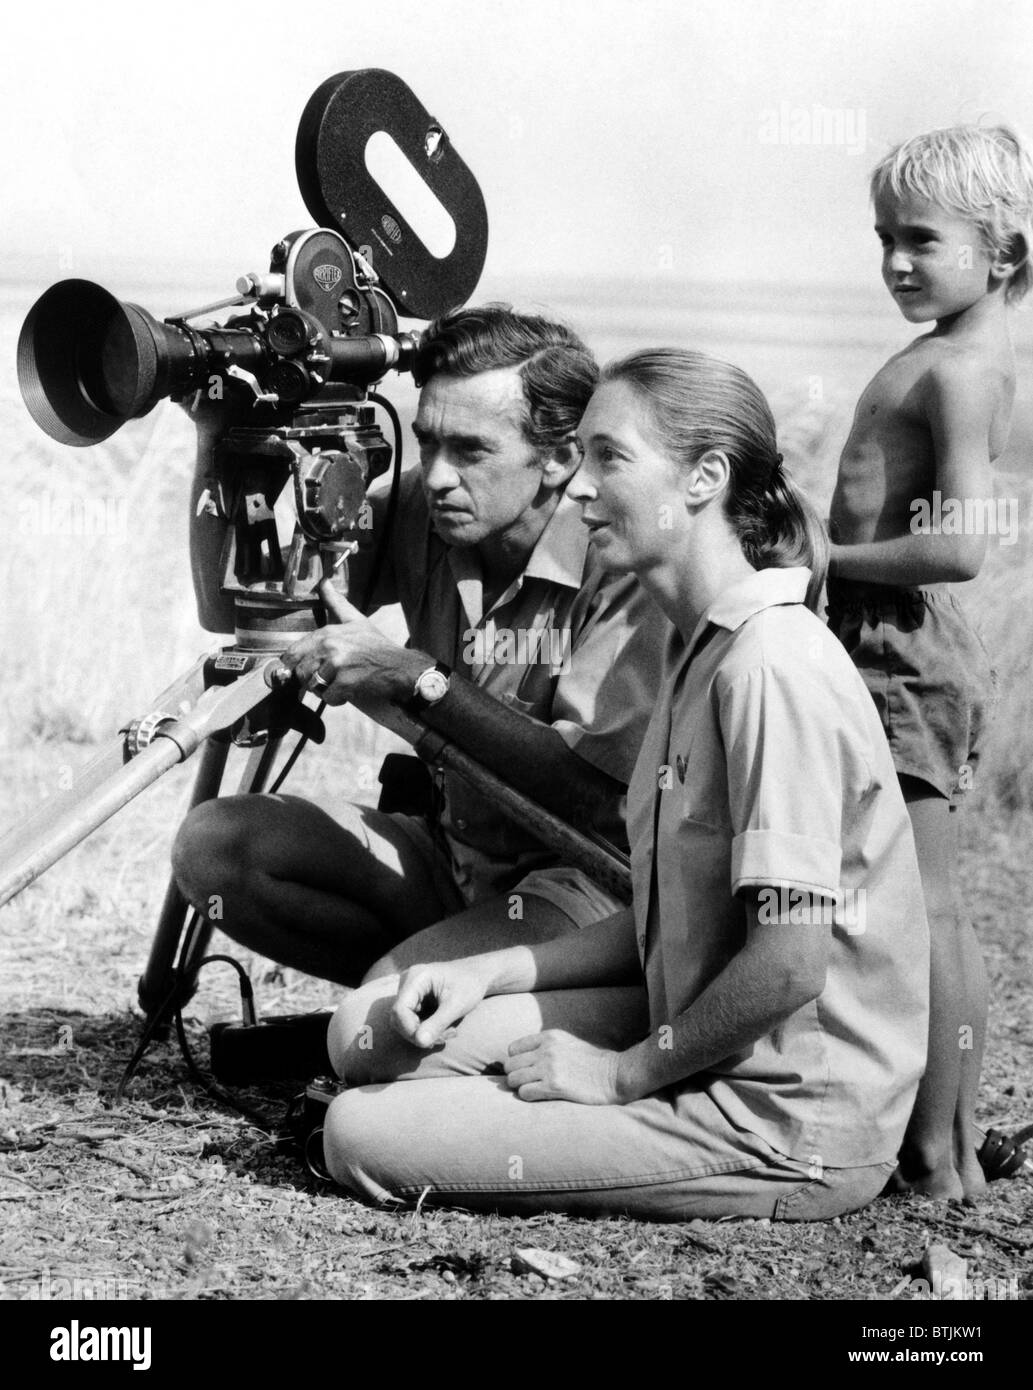 Hugo van Lawick, Jane Goodall, and their son, Grub study the lifestyles of  Baboons in Tanzania. ca 1976. Courtesy: CSU Archives Stock Photo - Alamy